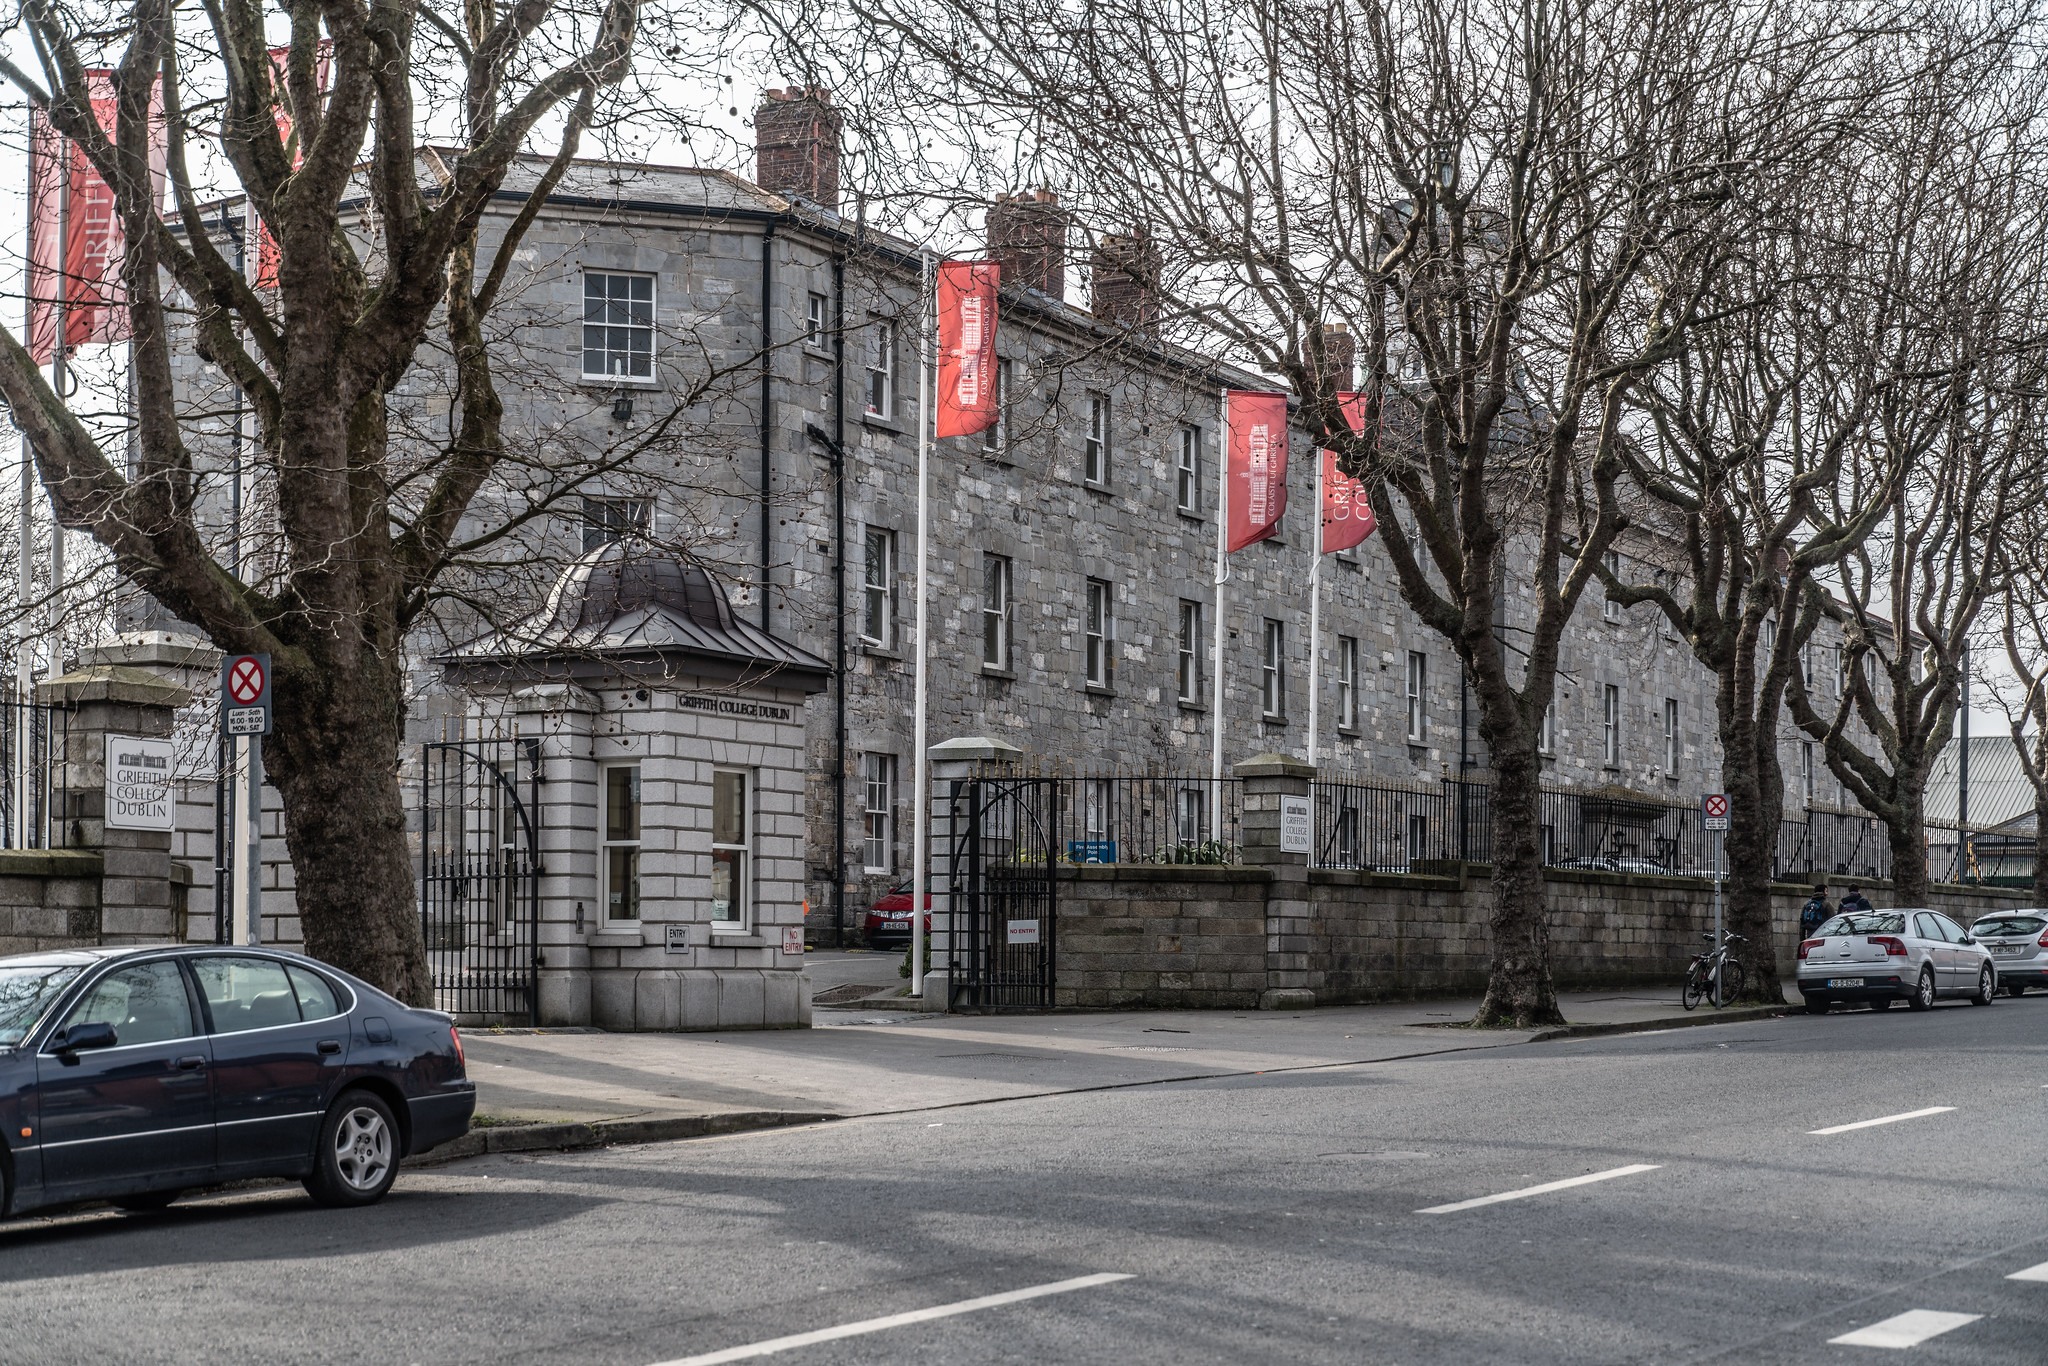 Cars parked in front of the old building at Griffith College, one of the best universities in Ireland, during the Fall